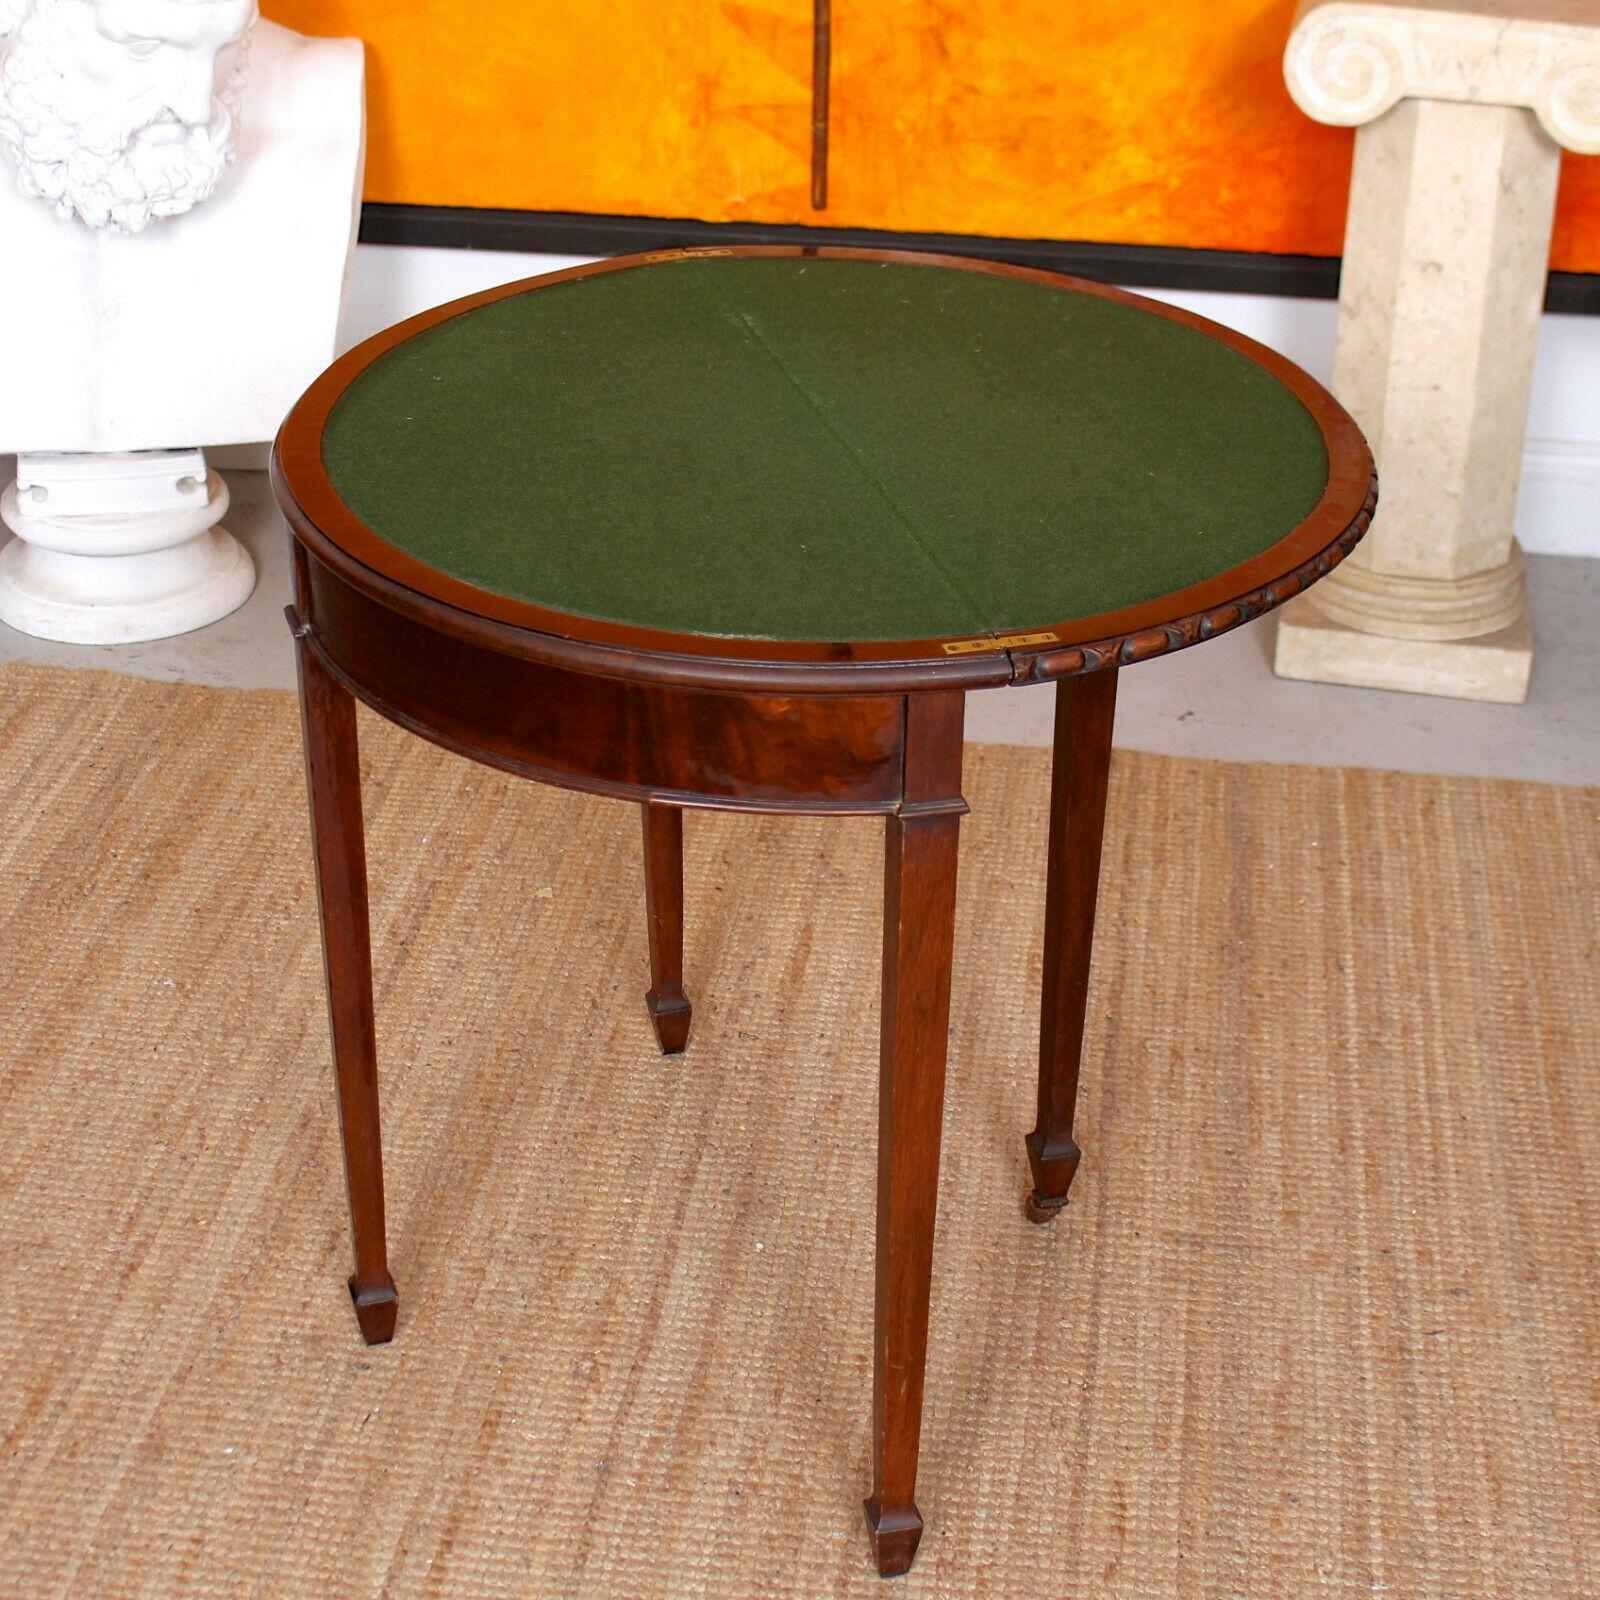 English Demilune Card Table Edwardian Circular Mahogany Folding Console Table In Good Condition For Sale In Newcastle upon Tyne, GB